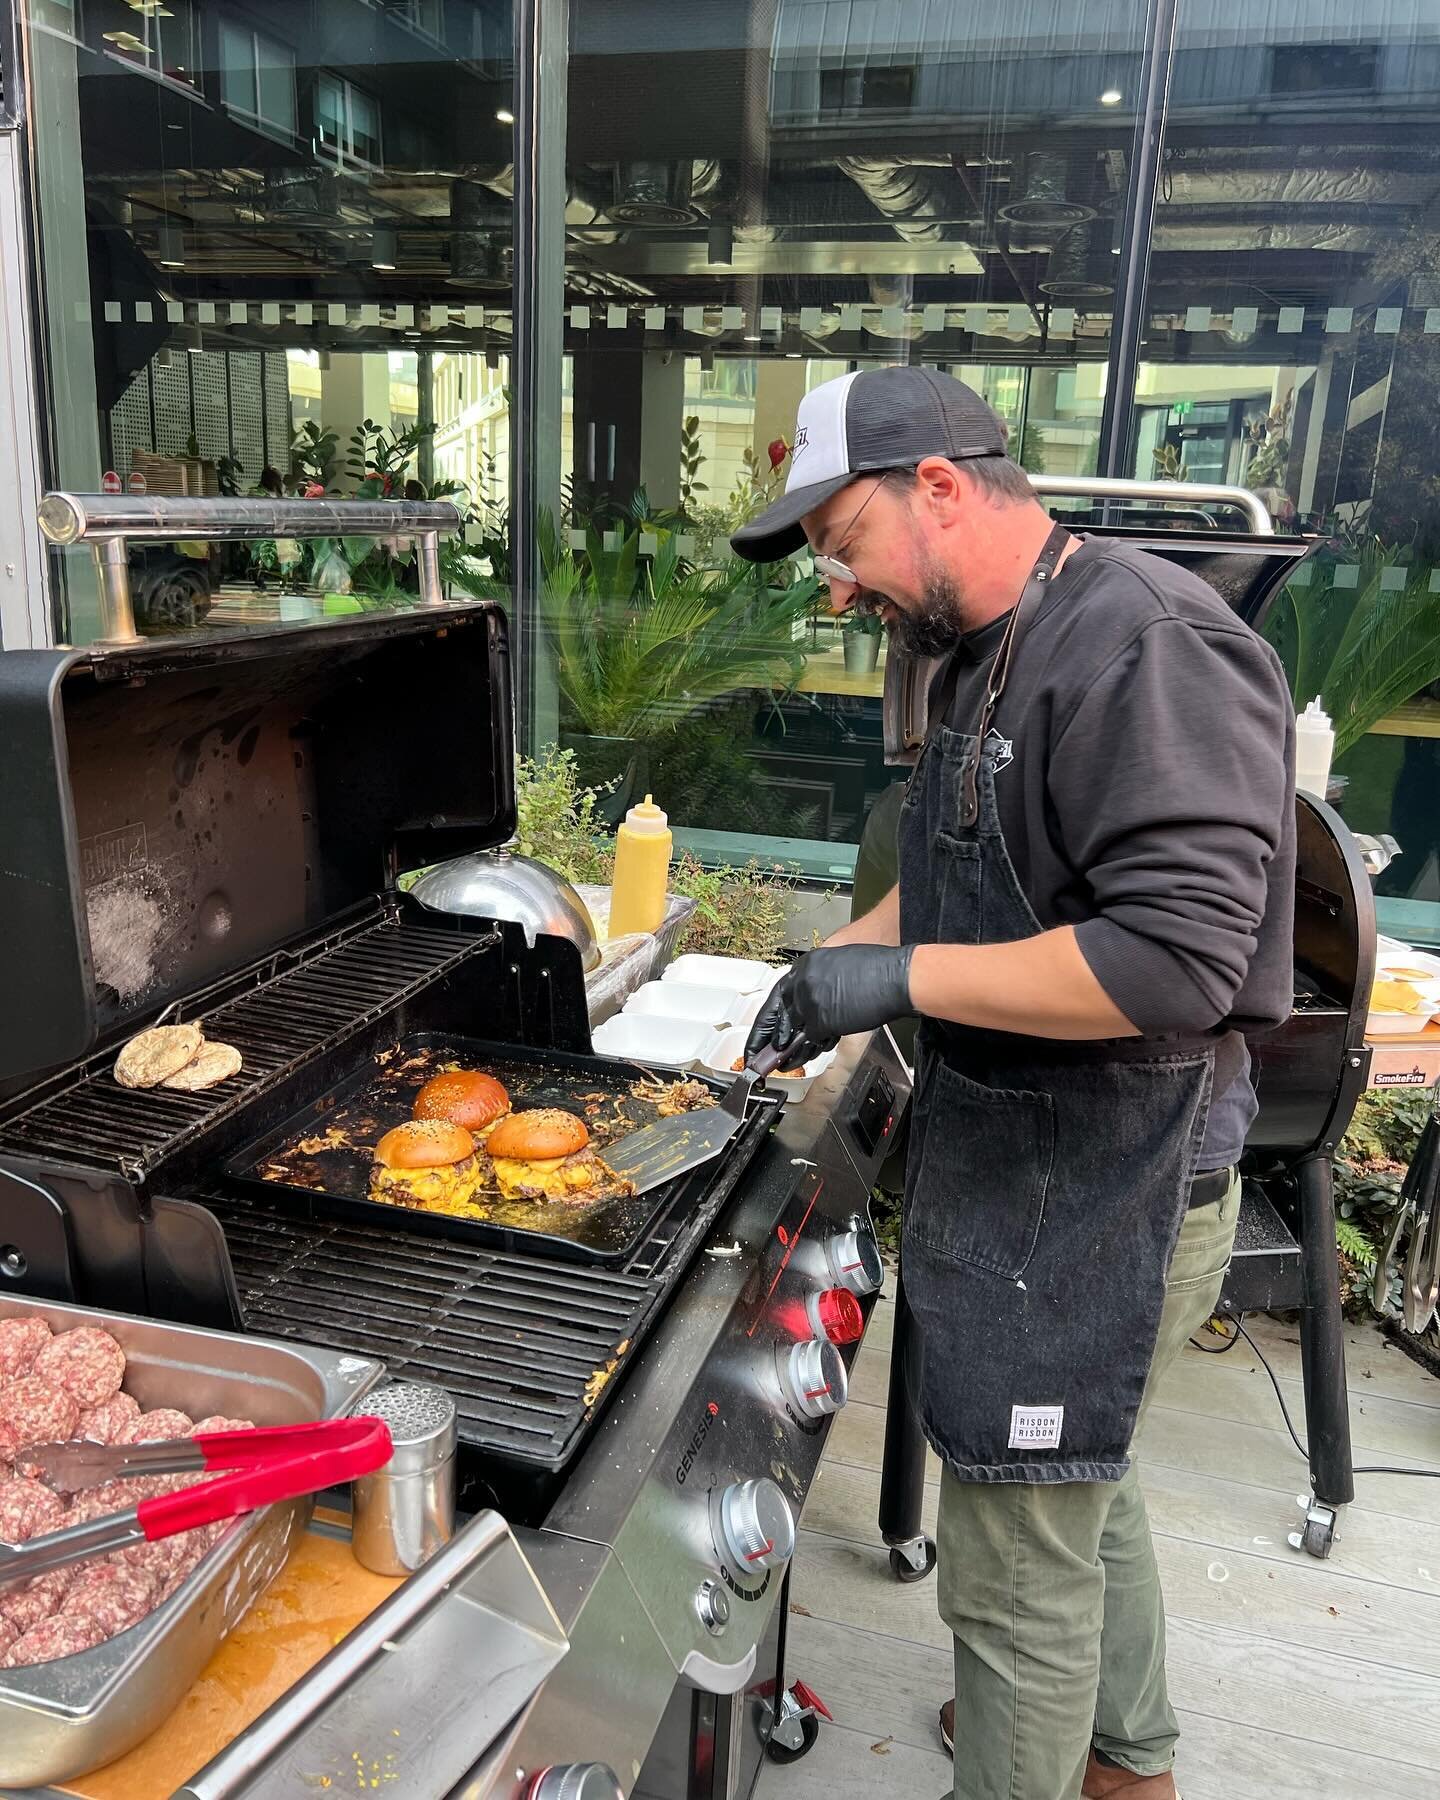 Huge thanks to the mighty @thebeefyboys for coming to the @weberuk London office yesterday to cook up the team lunch. We absolutely loved it! Thanks @murffromthebeefyboys and @apethree - you guys are the best. Much love 🔥🥰🍔